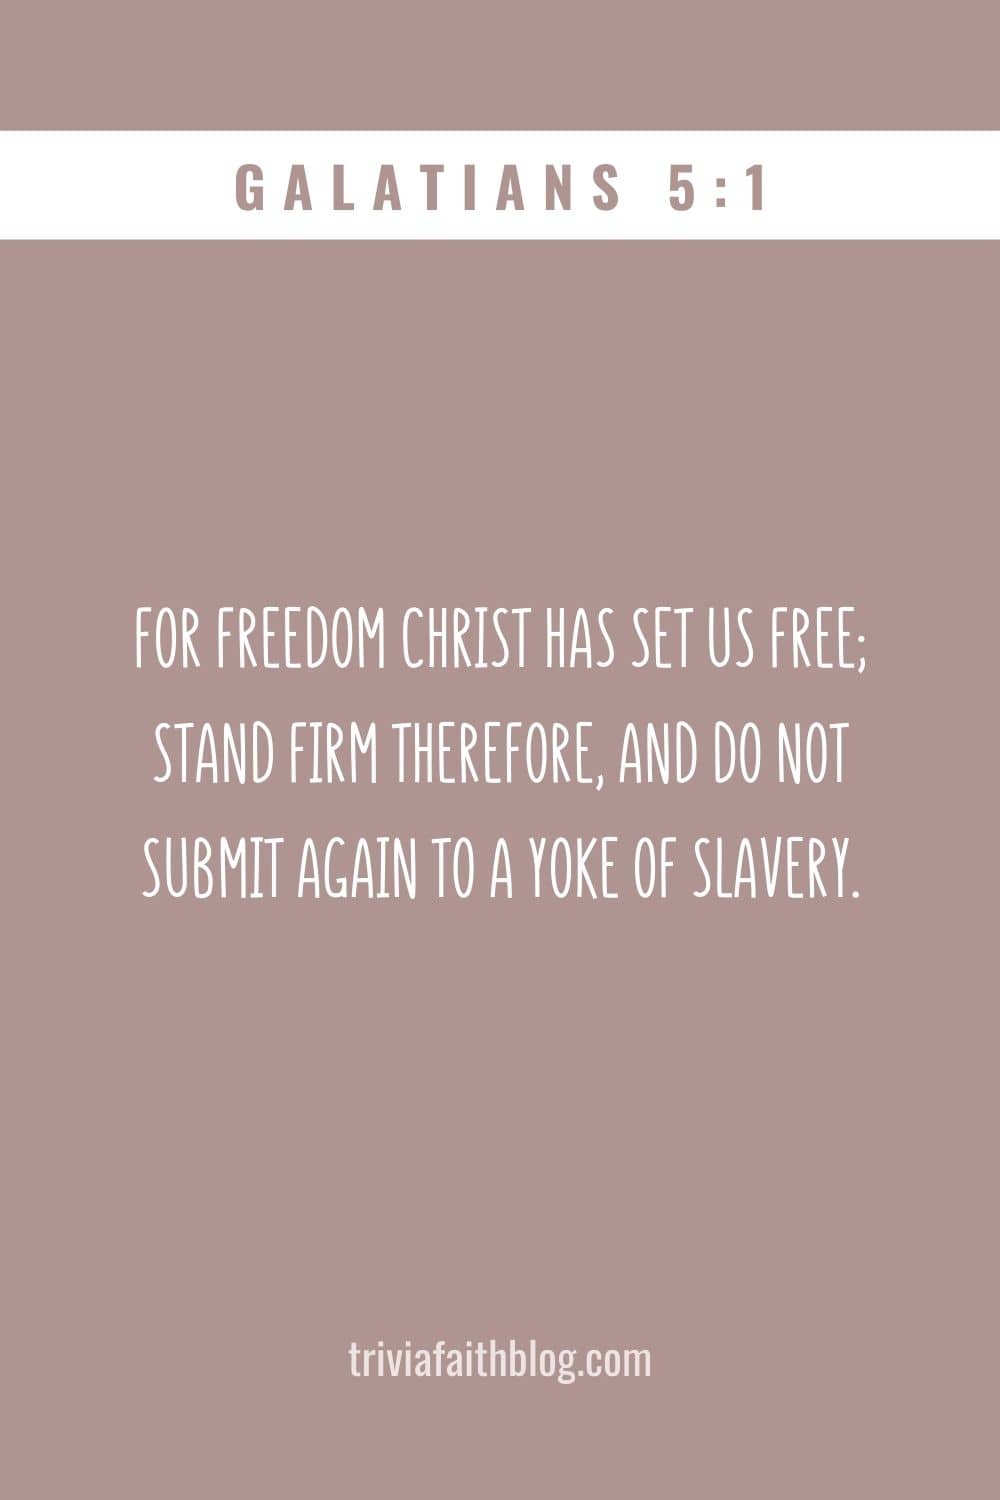 For freedom Christ has set us free